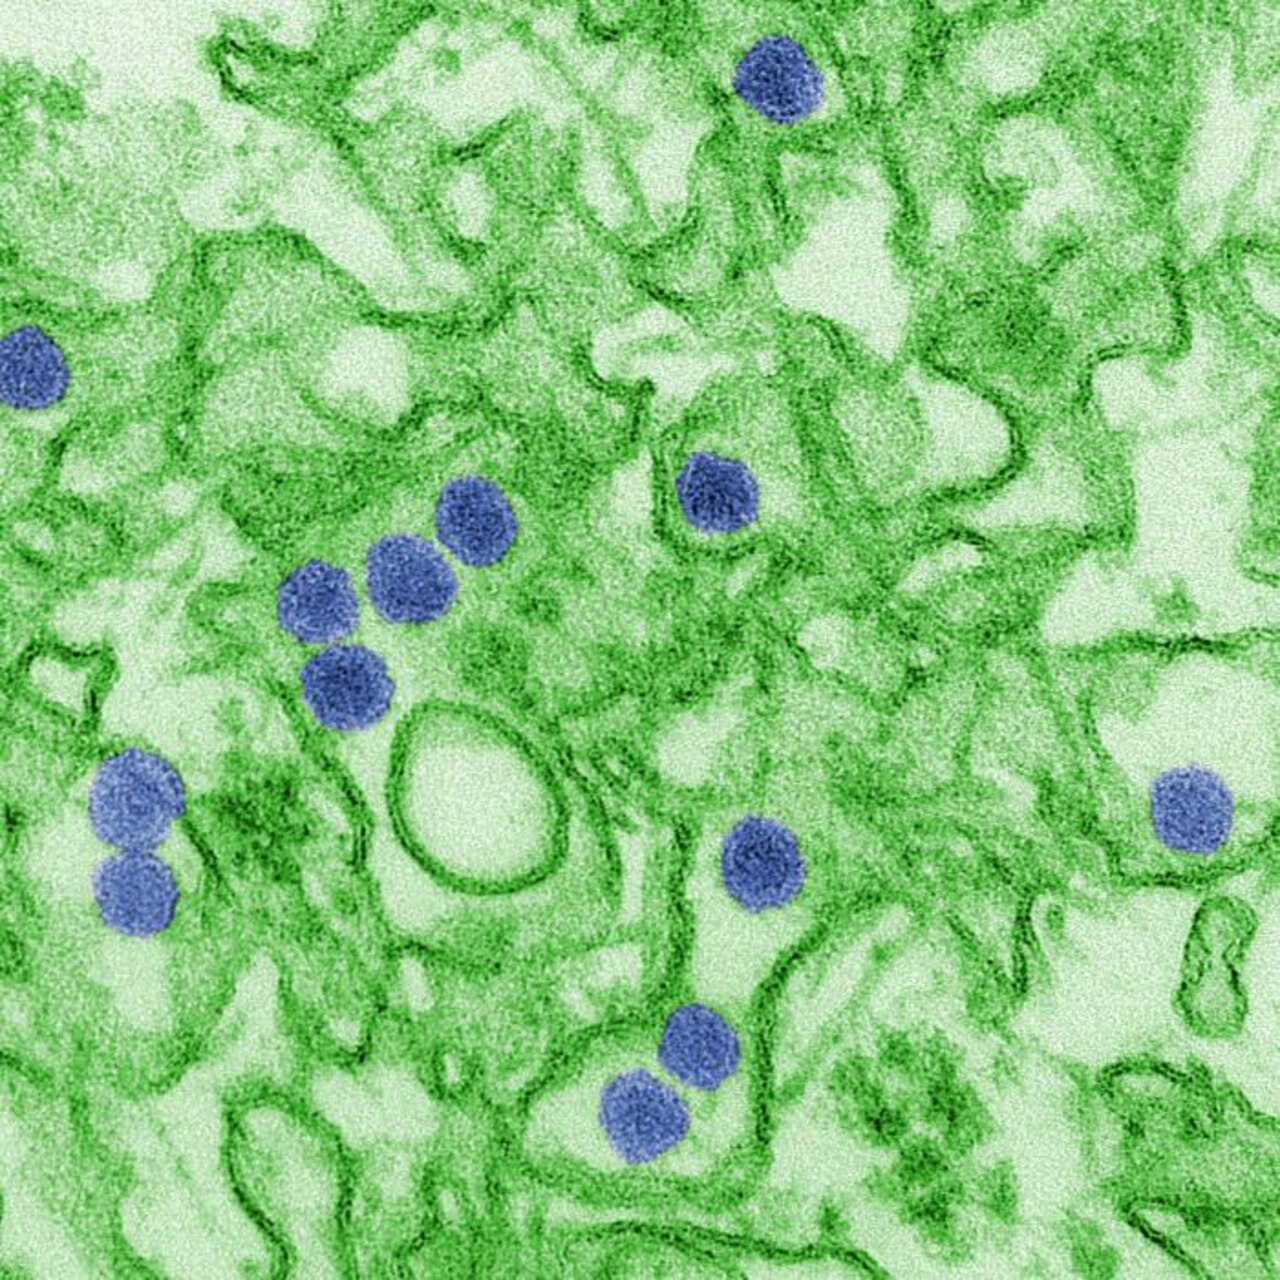 This is a digitally-colorized transmission electron micrograph of Zika virus, which is a member of the family Flaviviridae. Virus particles, here colored red, are 40 nanometers in diameter with an outer envelope and an inner dense core. Zika virus is spread to people through mosquito bites. The most common symptoms of Zika virus disease are fever, rash, joint pain and conjunctivitis, or red eyes. The illness is usually mild with symptoms lasting from several days to a week. Severe disease requiring hospitalization is uncommon. Centers for Disease Control and Prevention photo by Cynthia Goldsmith